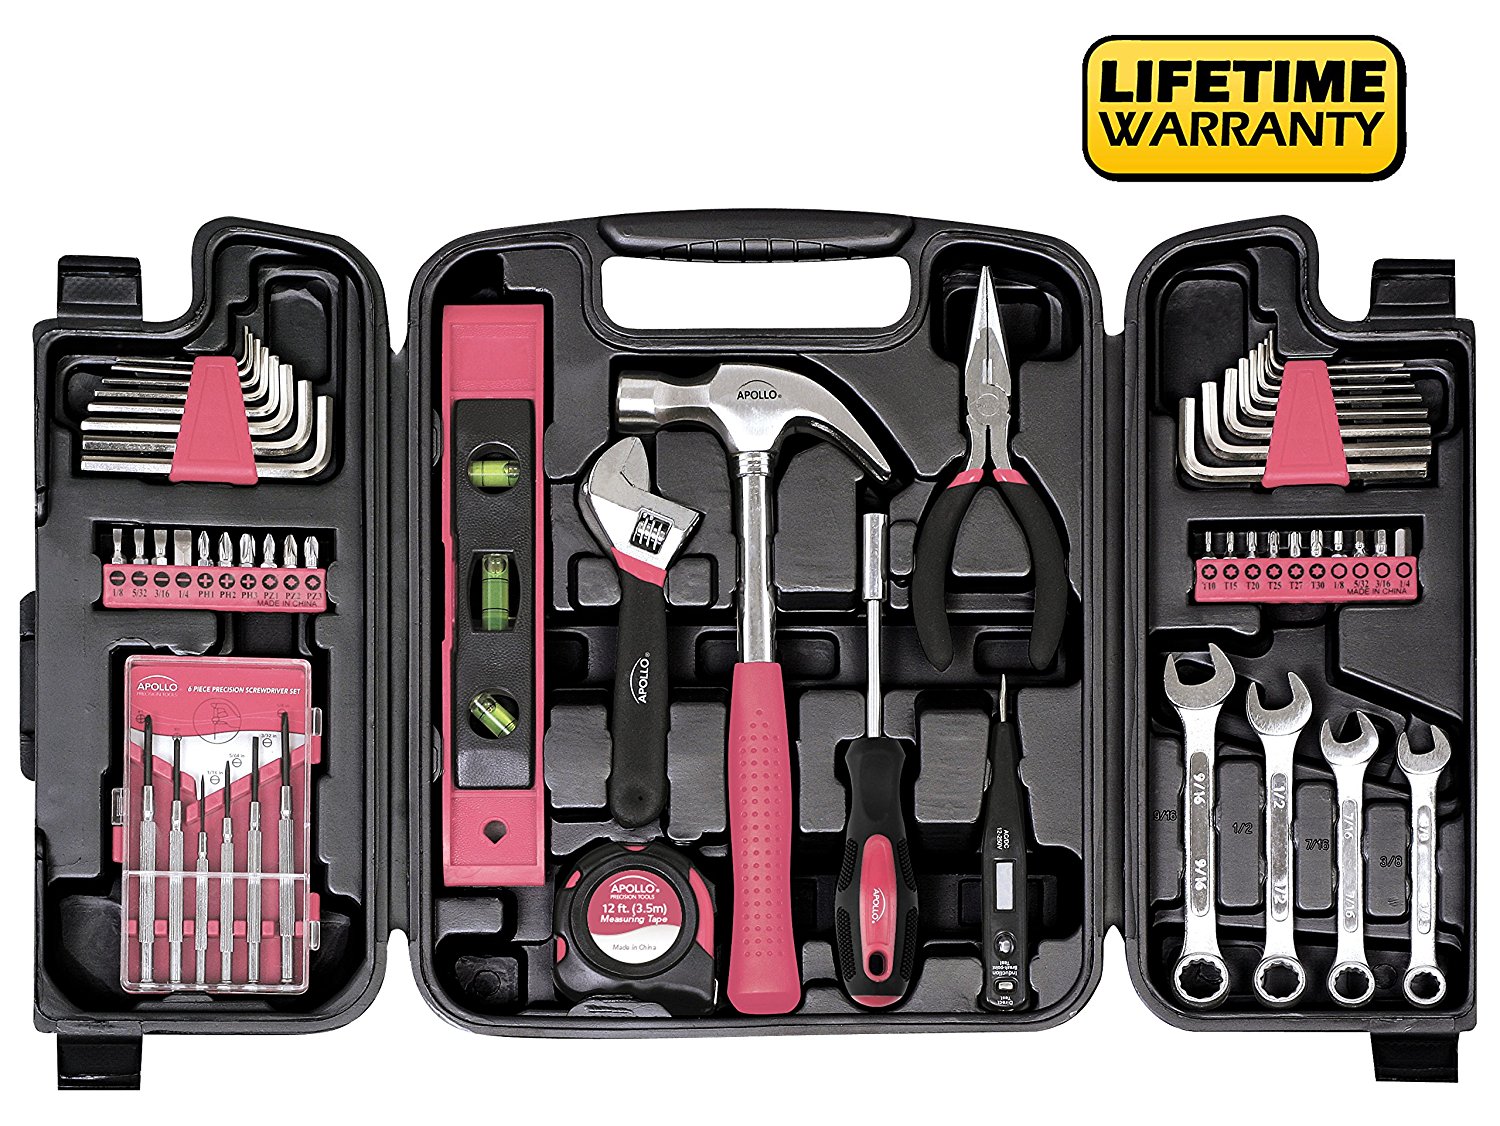 Apollo Tools Dt9408 53 Piece Household Tool Set With Wrenches, Precision Screwdriver Set And Most Reached For Hand Tools In Storage Case - image 4 of 5